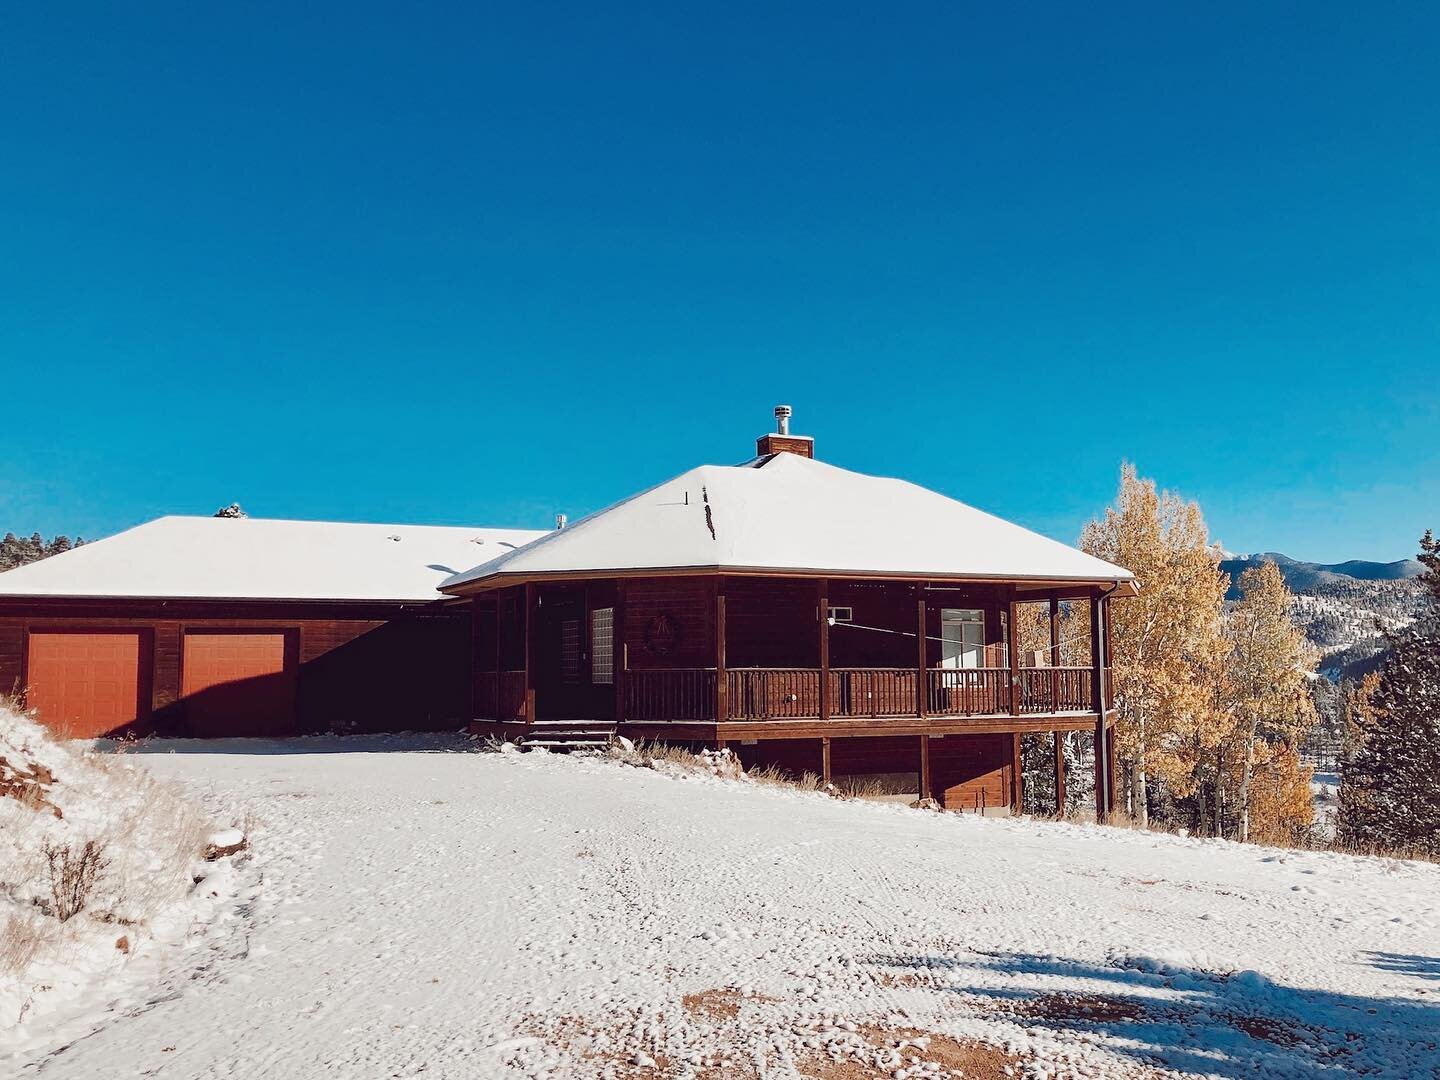 We&rsquo;ve been on a little hiatus recently, but now we&rsquo;re back and looking forward to fall at Aspen Lakehouse! Want to experience a little snow with your brightly colored fall leaves? We have some openings in November for you and your family/